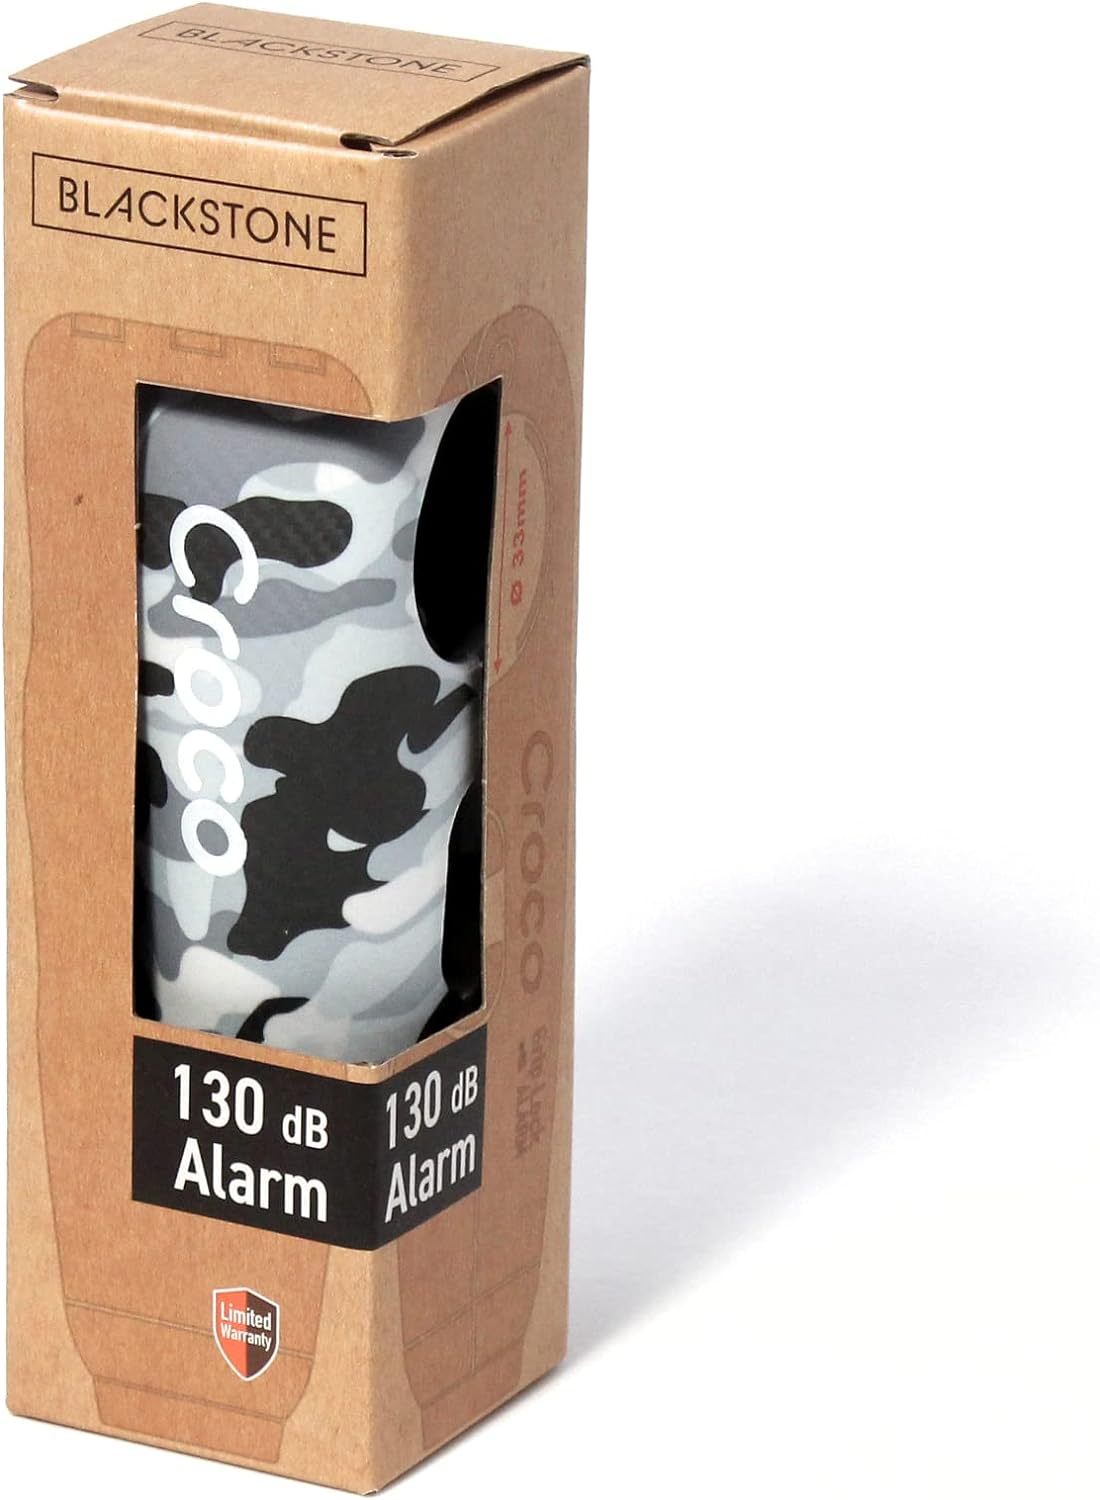 The image displays the packaging for a Croco alarm lock. The box has a natural brown cardboard color with a rectangular cut-out window that allows the black textured surface of the lock to be seen. This implies that the product is designed with visibility in mind, allowing potential buyers to get a glimpse of the actual item inside. The text on the package prominently mentions "130 dB Alarm," emphasizing the lock's security feature. A loud alarm that can act as a deterrent to theft. 